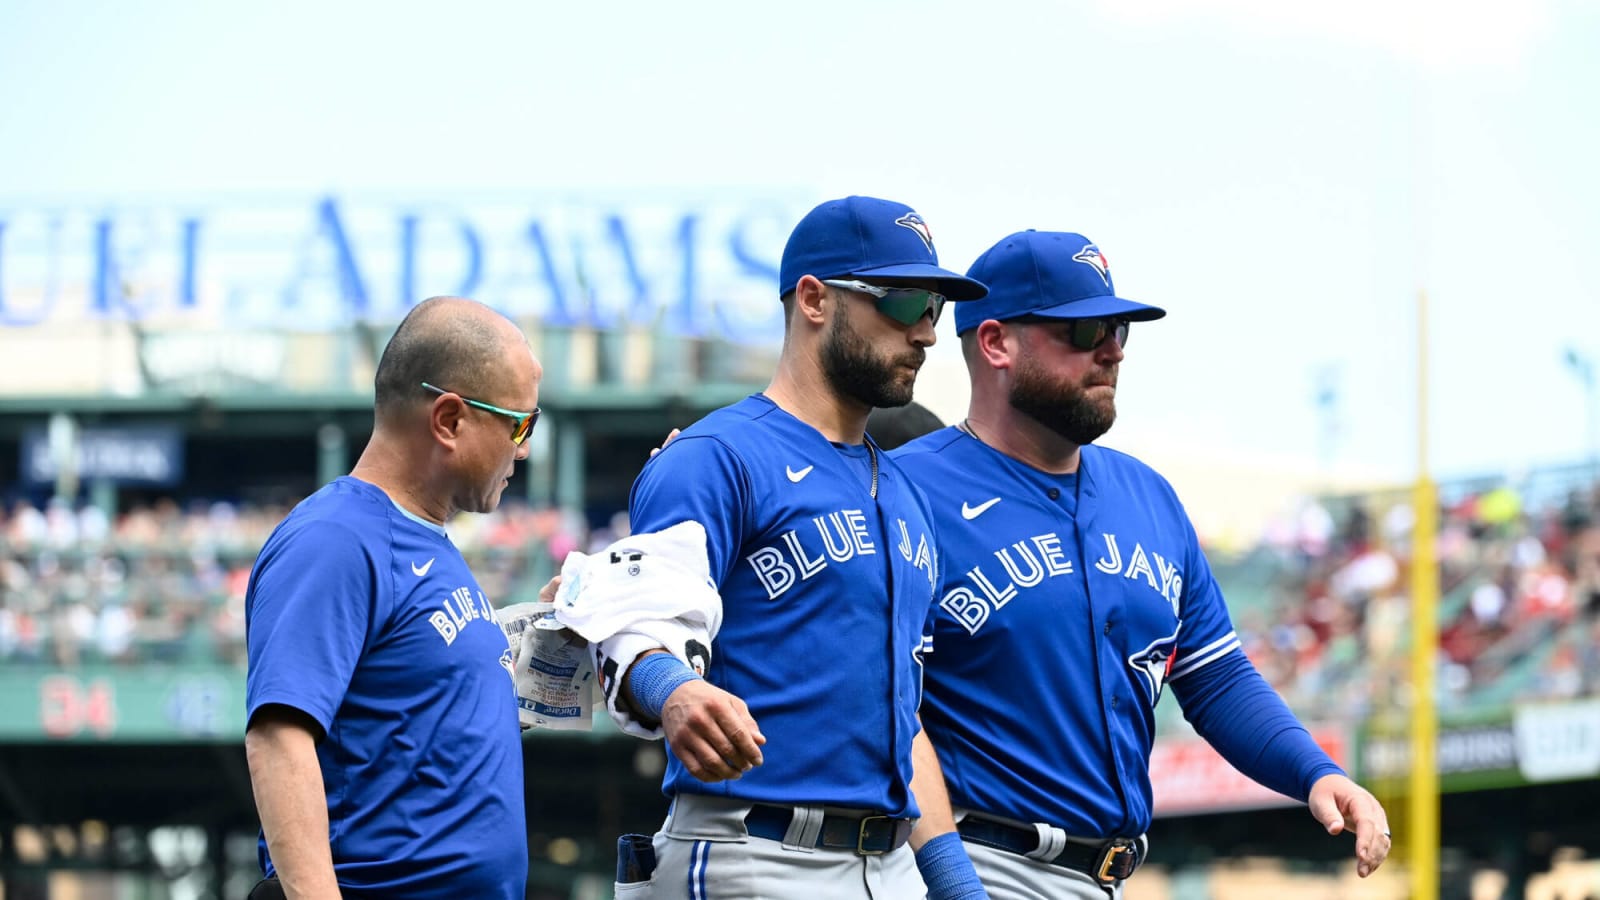 Toronto Blue Jays outfielder Kevin Kiermaier says he will let